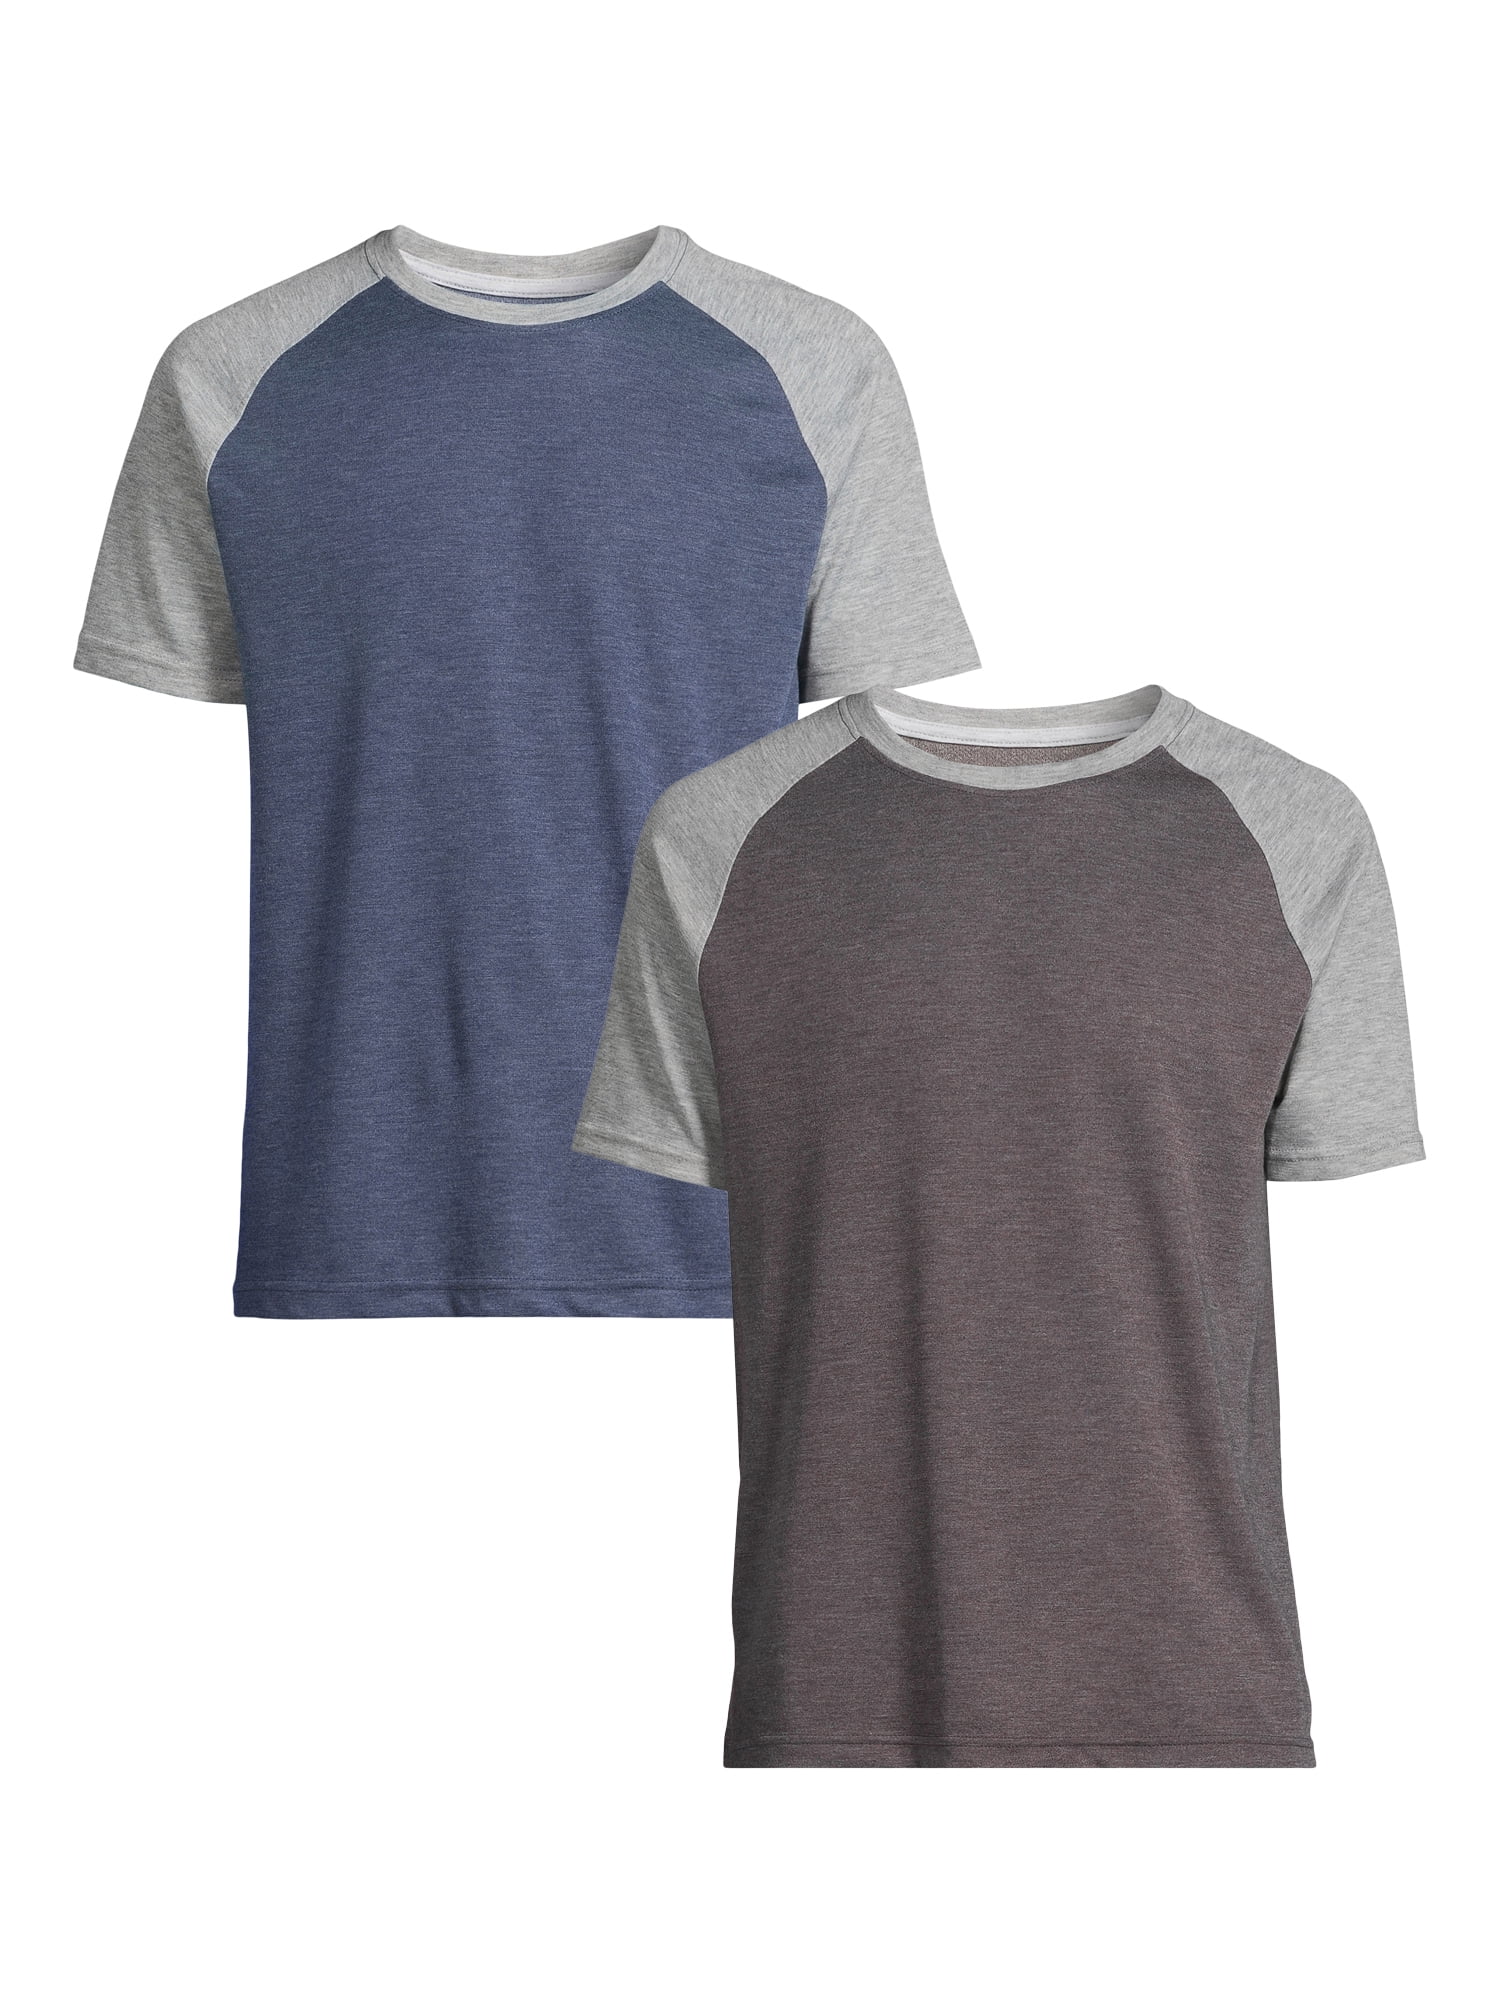 George Men's and Big Men's Cotton T-Shirt with Raglan Sleeves, 2-Pack ...